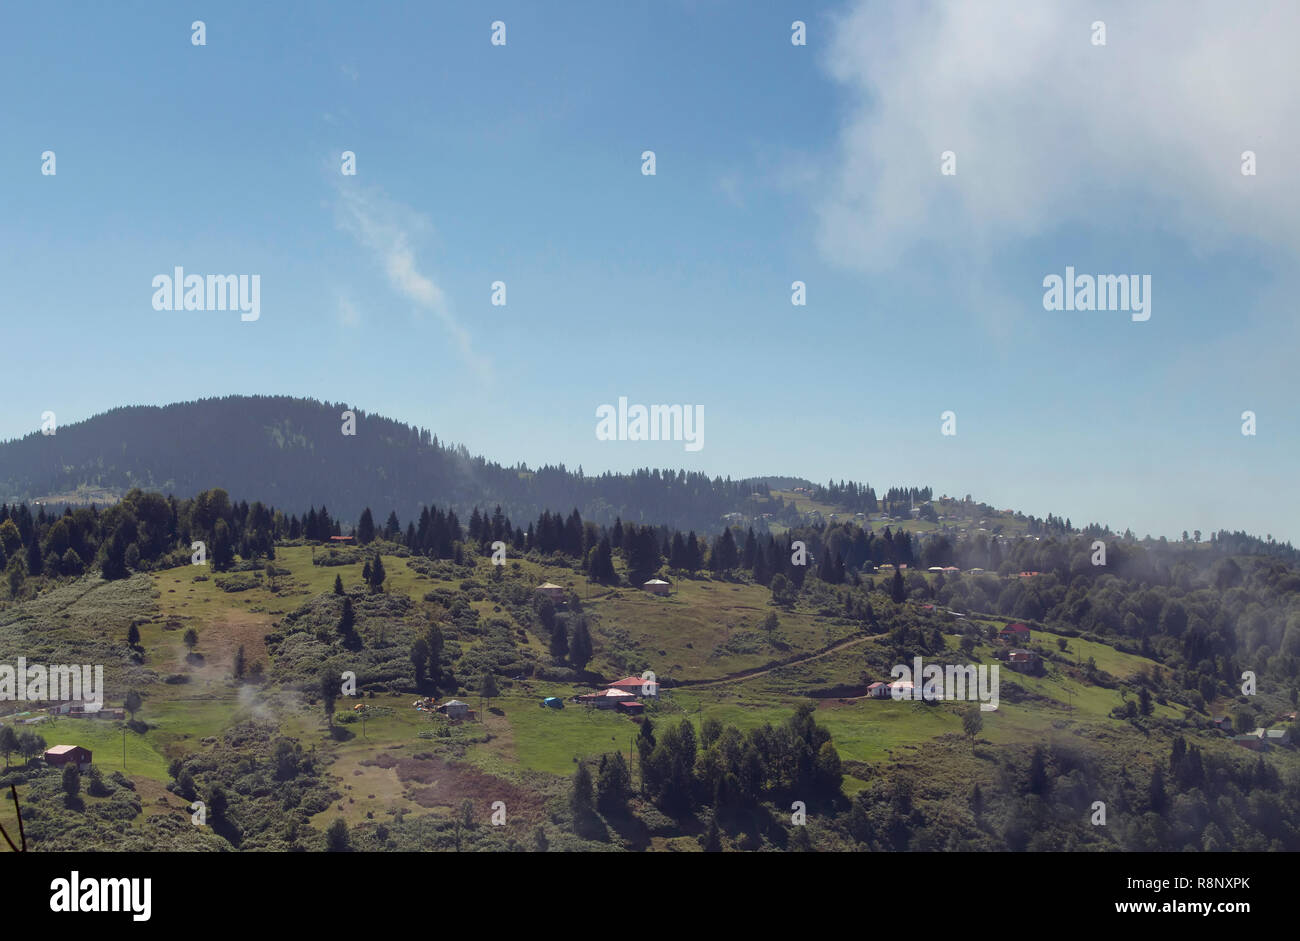 View of high plateau village, forest and mountain in fog creating beautiful nature scene. The image is captured in Trabzon/Rize area of Black Sea regi Stock Photo